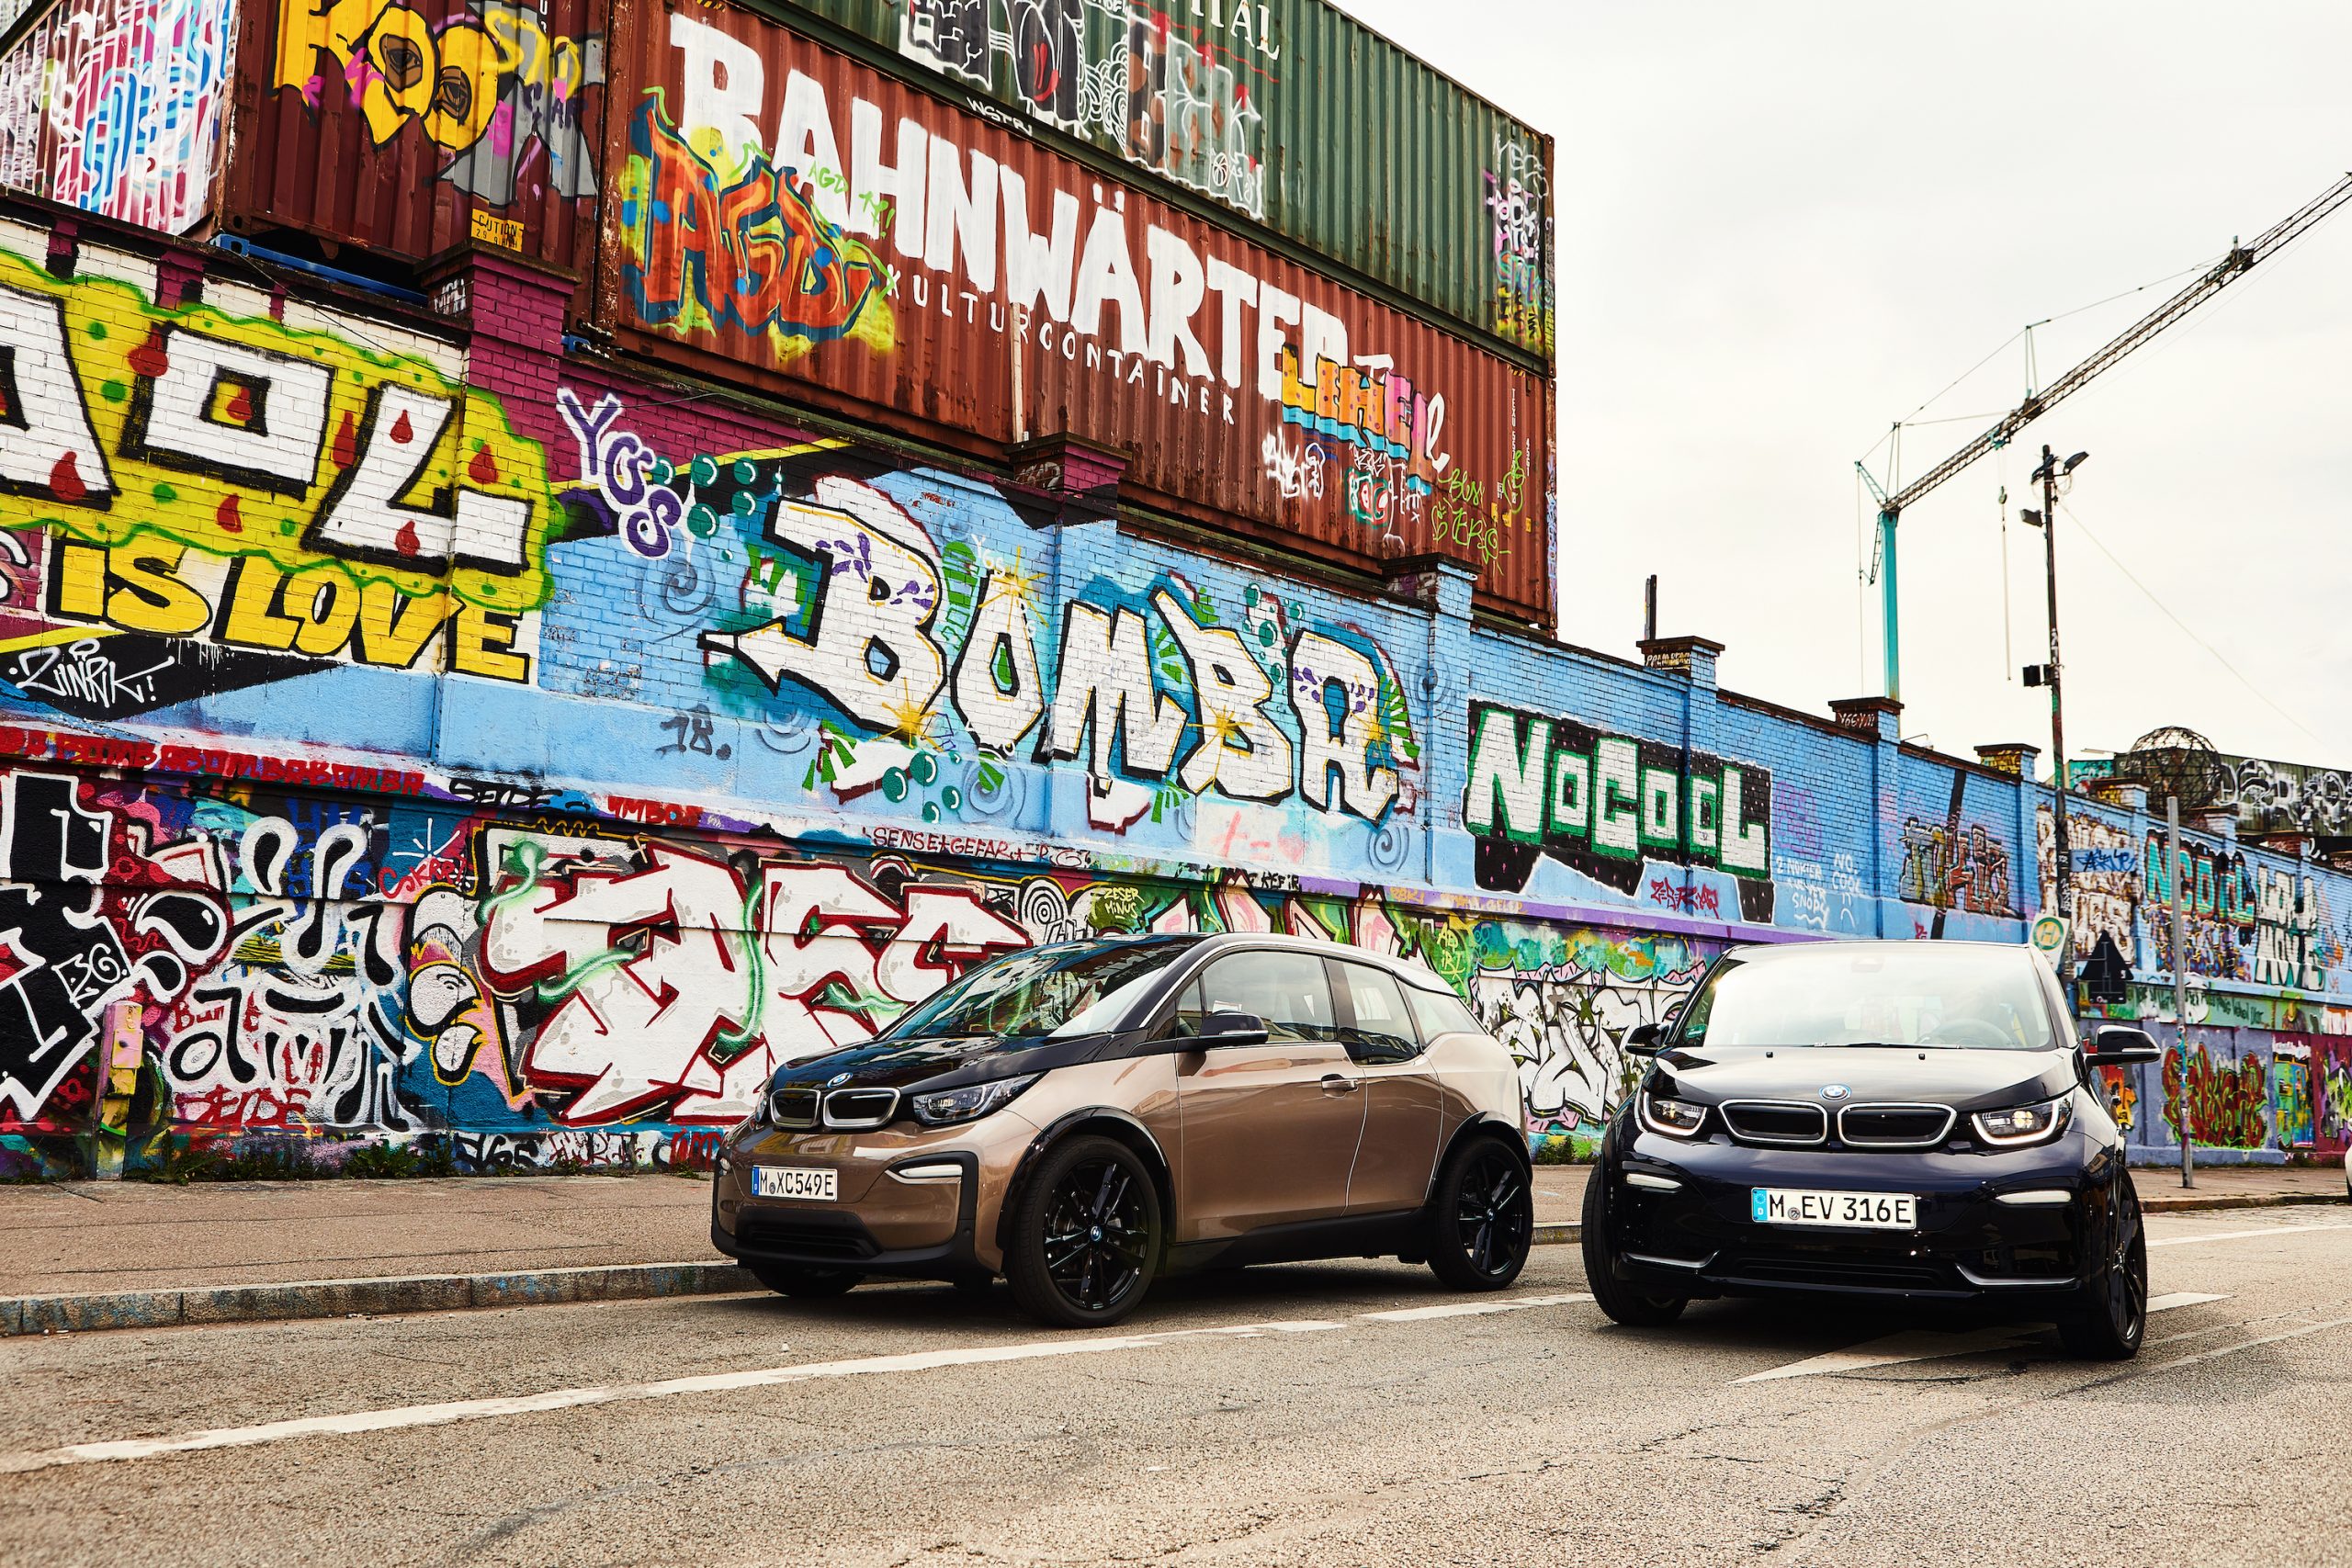 The BMW i3 is a popular used electric car